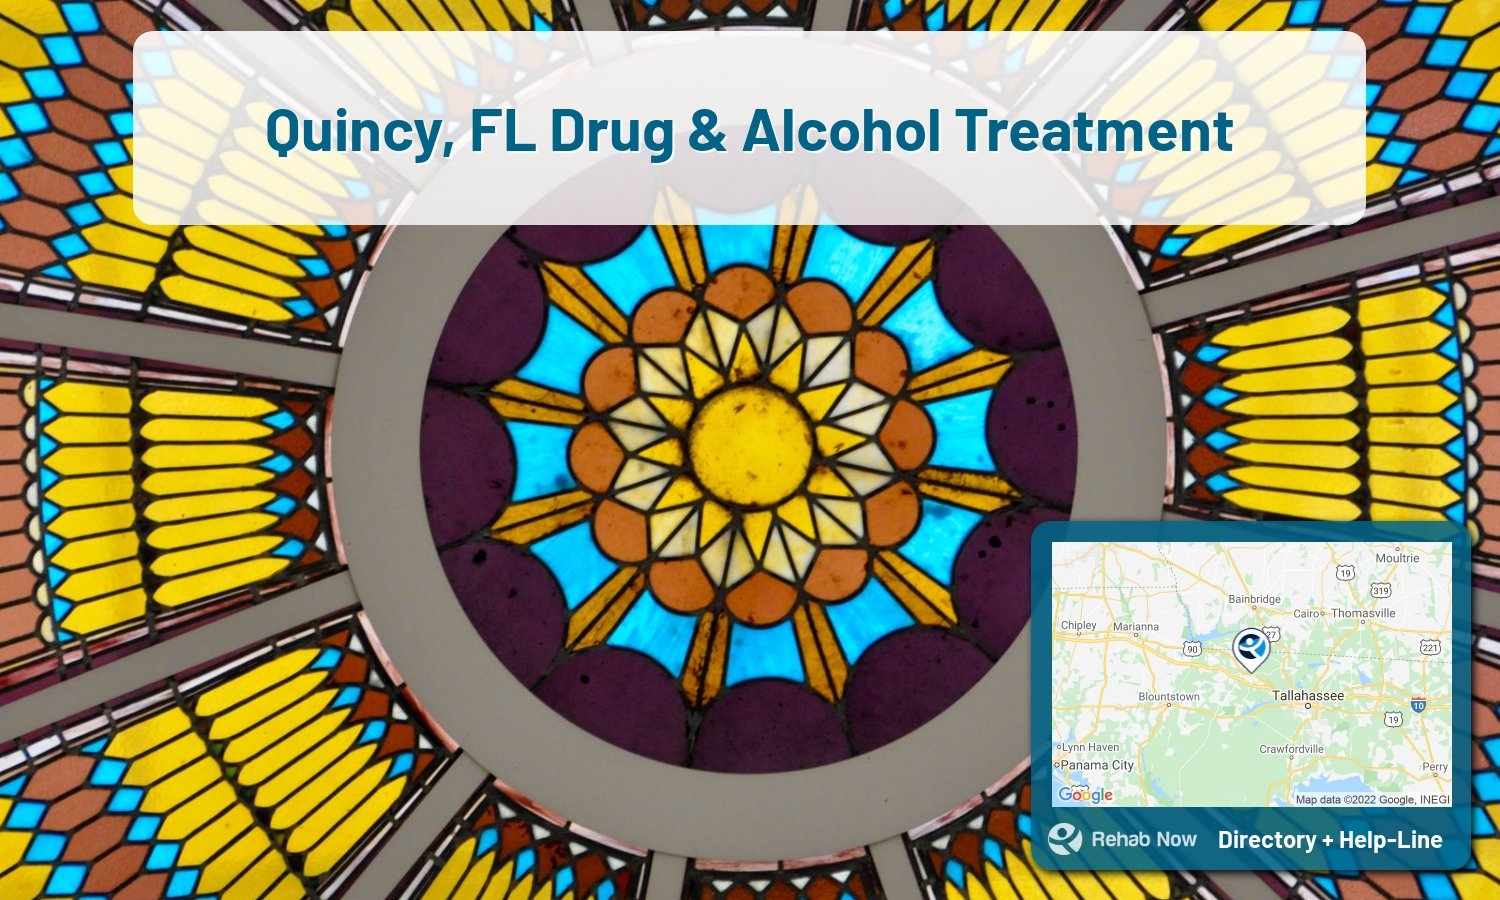 Quincy, FL Treatment Centers. Find drug rehab in Quincy, Florida, or detox and treatment programs. Get the right help now!